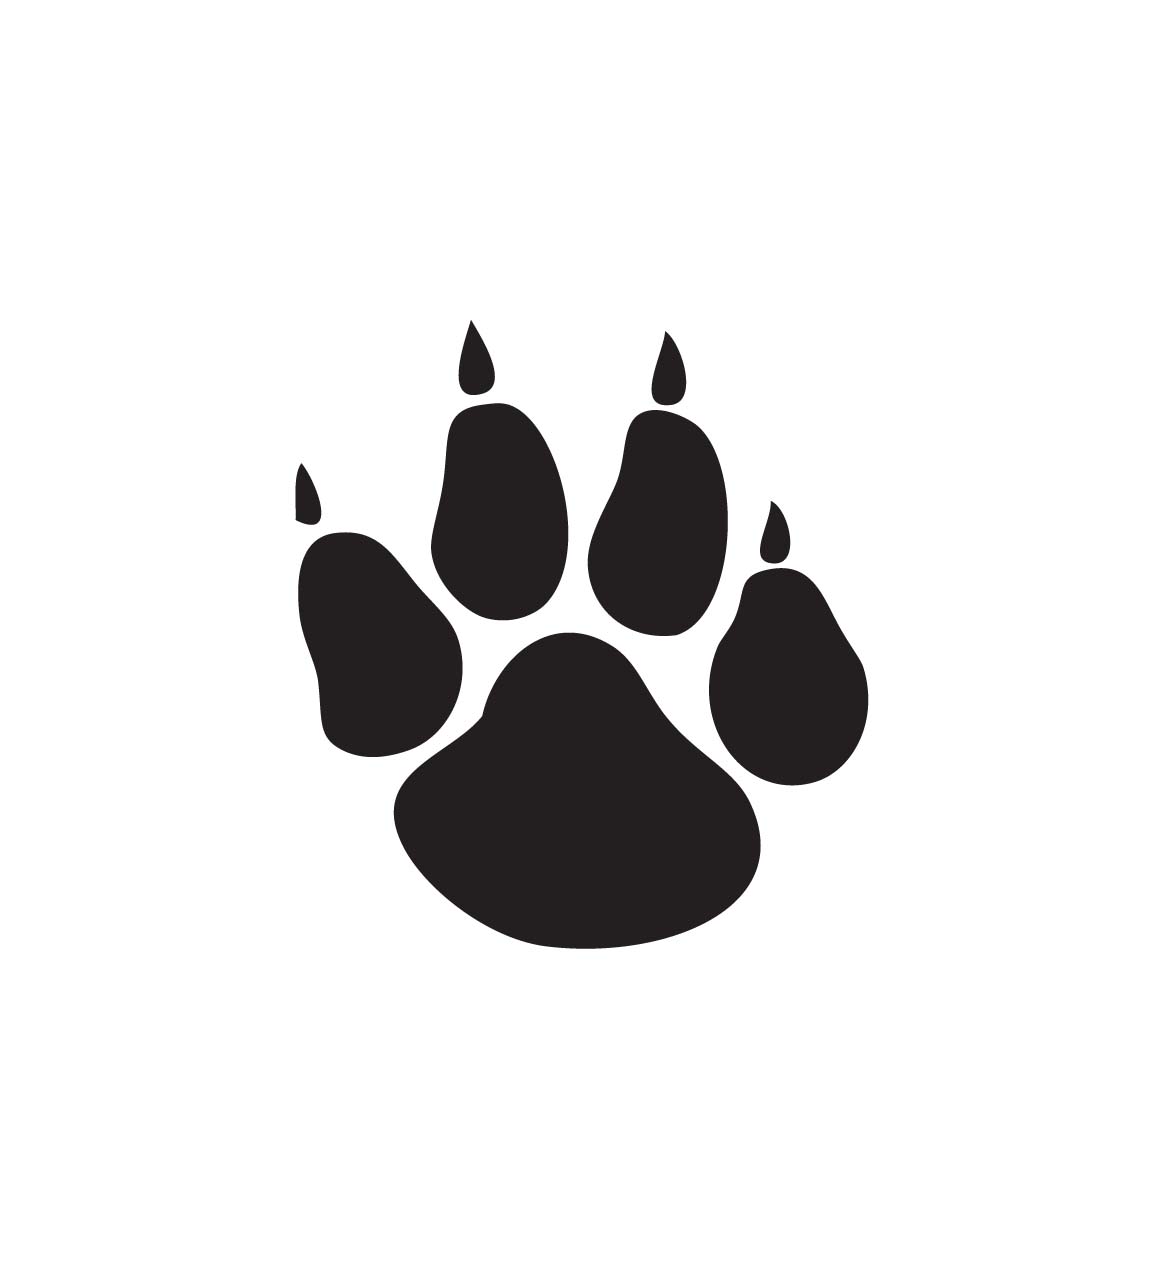 Paw Print Images Free | Free Download Clip Art | Free Clip Art ...